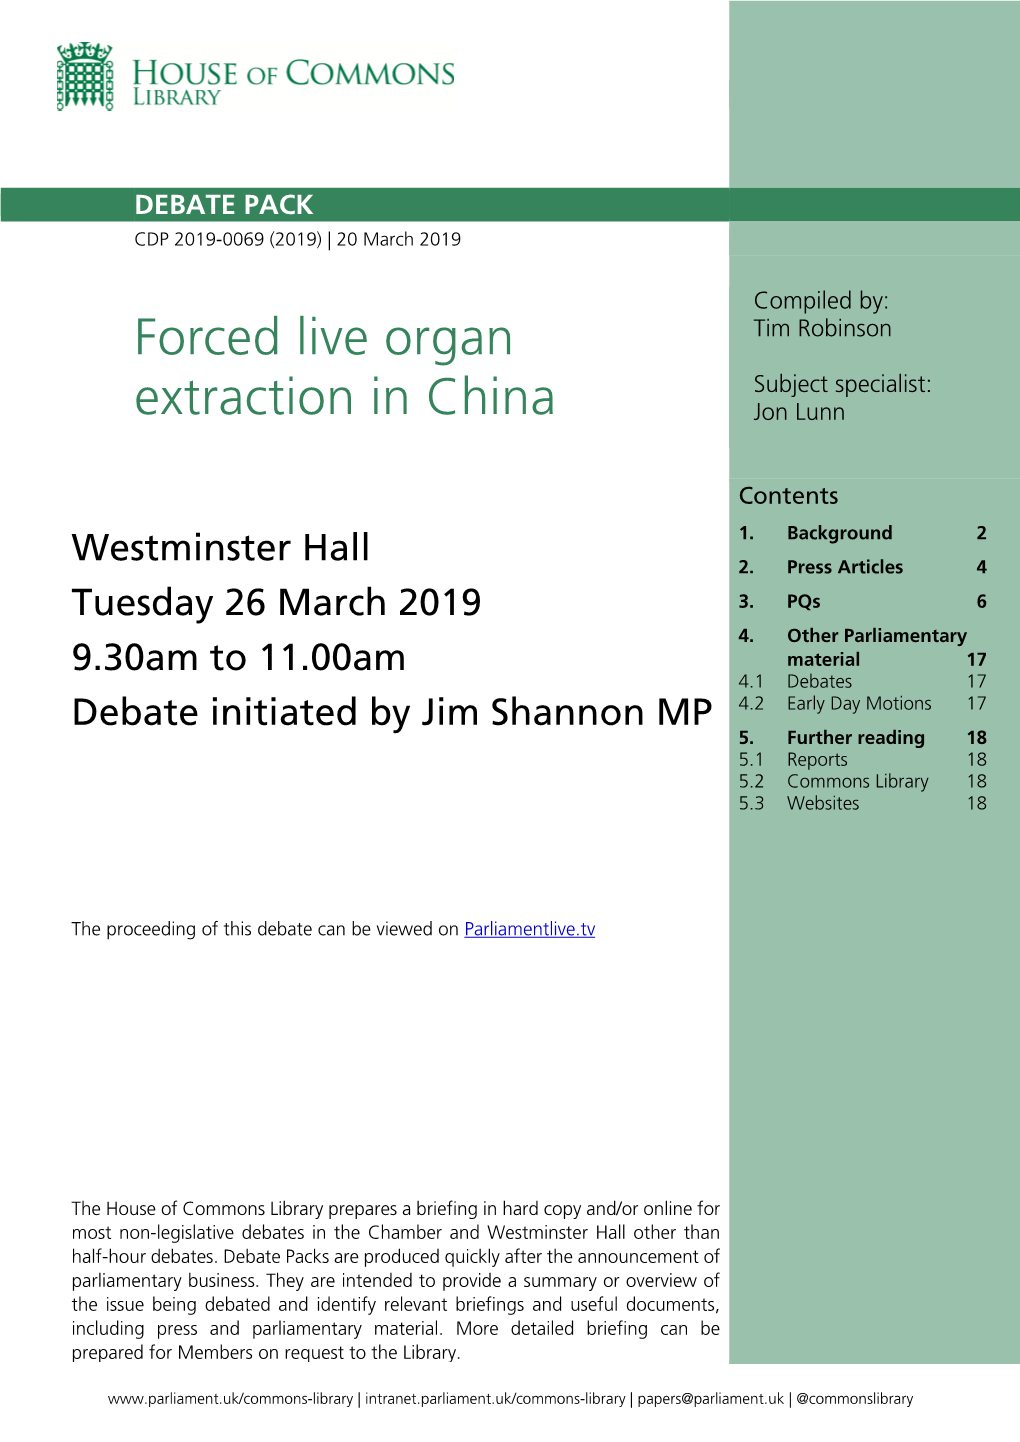 Forced Live Organ Extraction in China 3